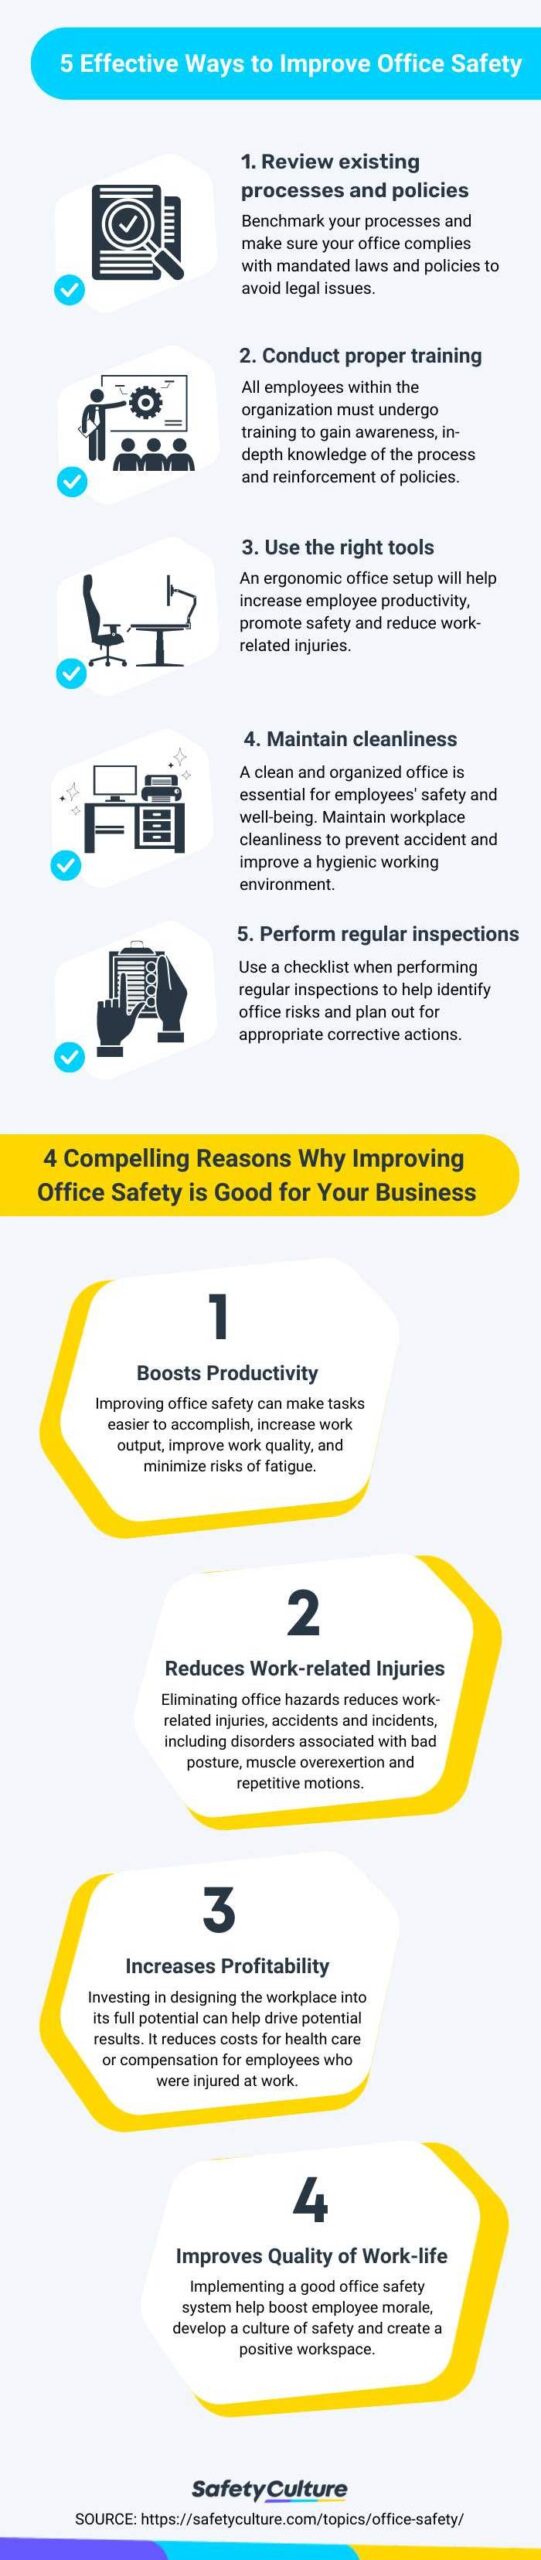 Effective ways to improve office safety